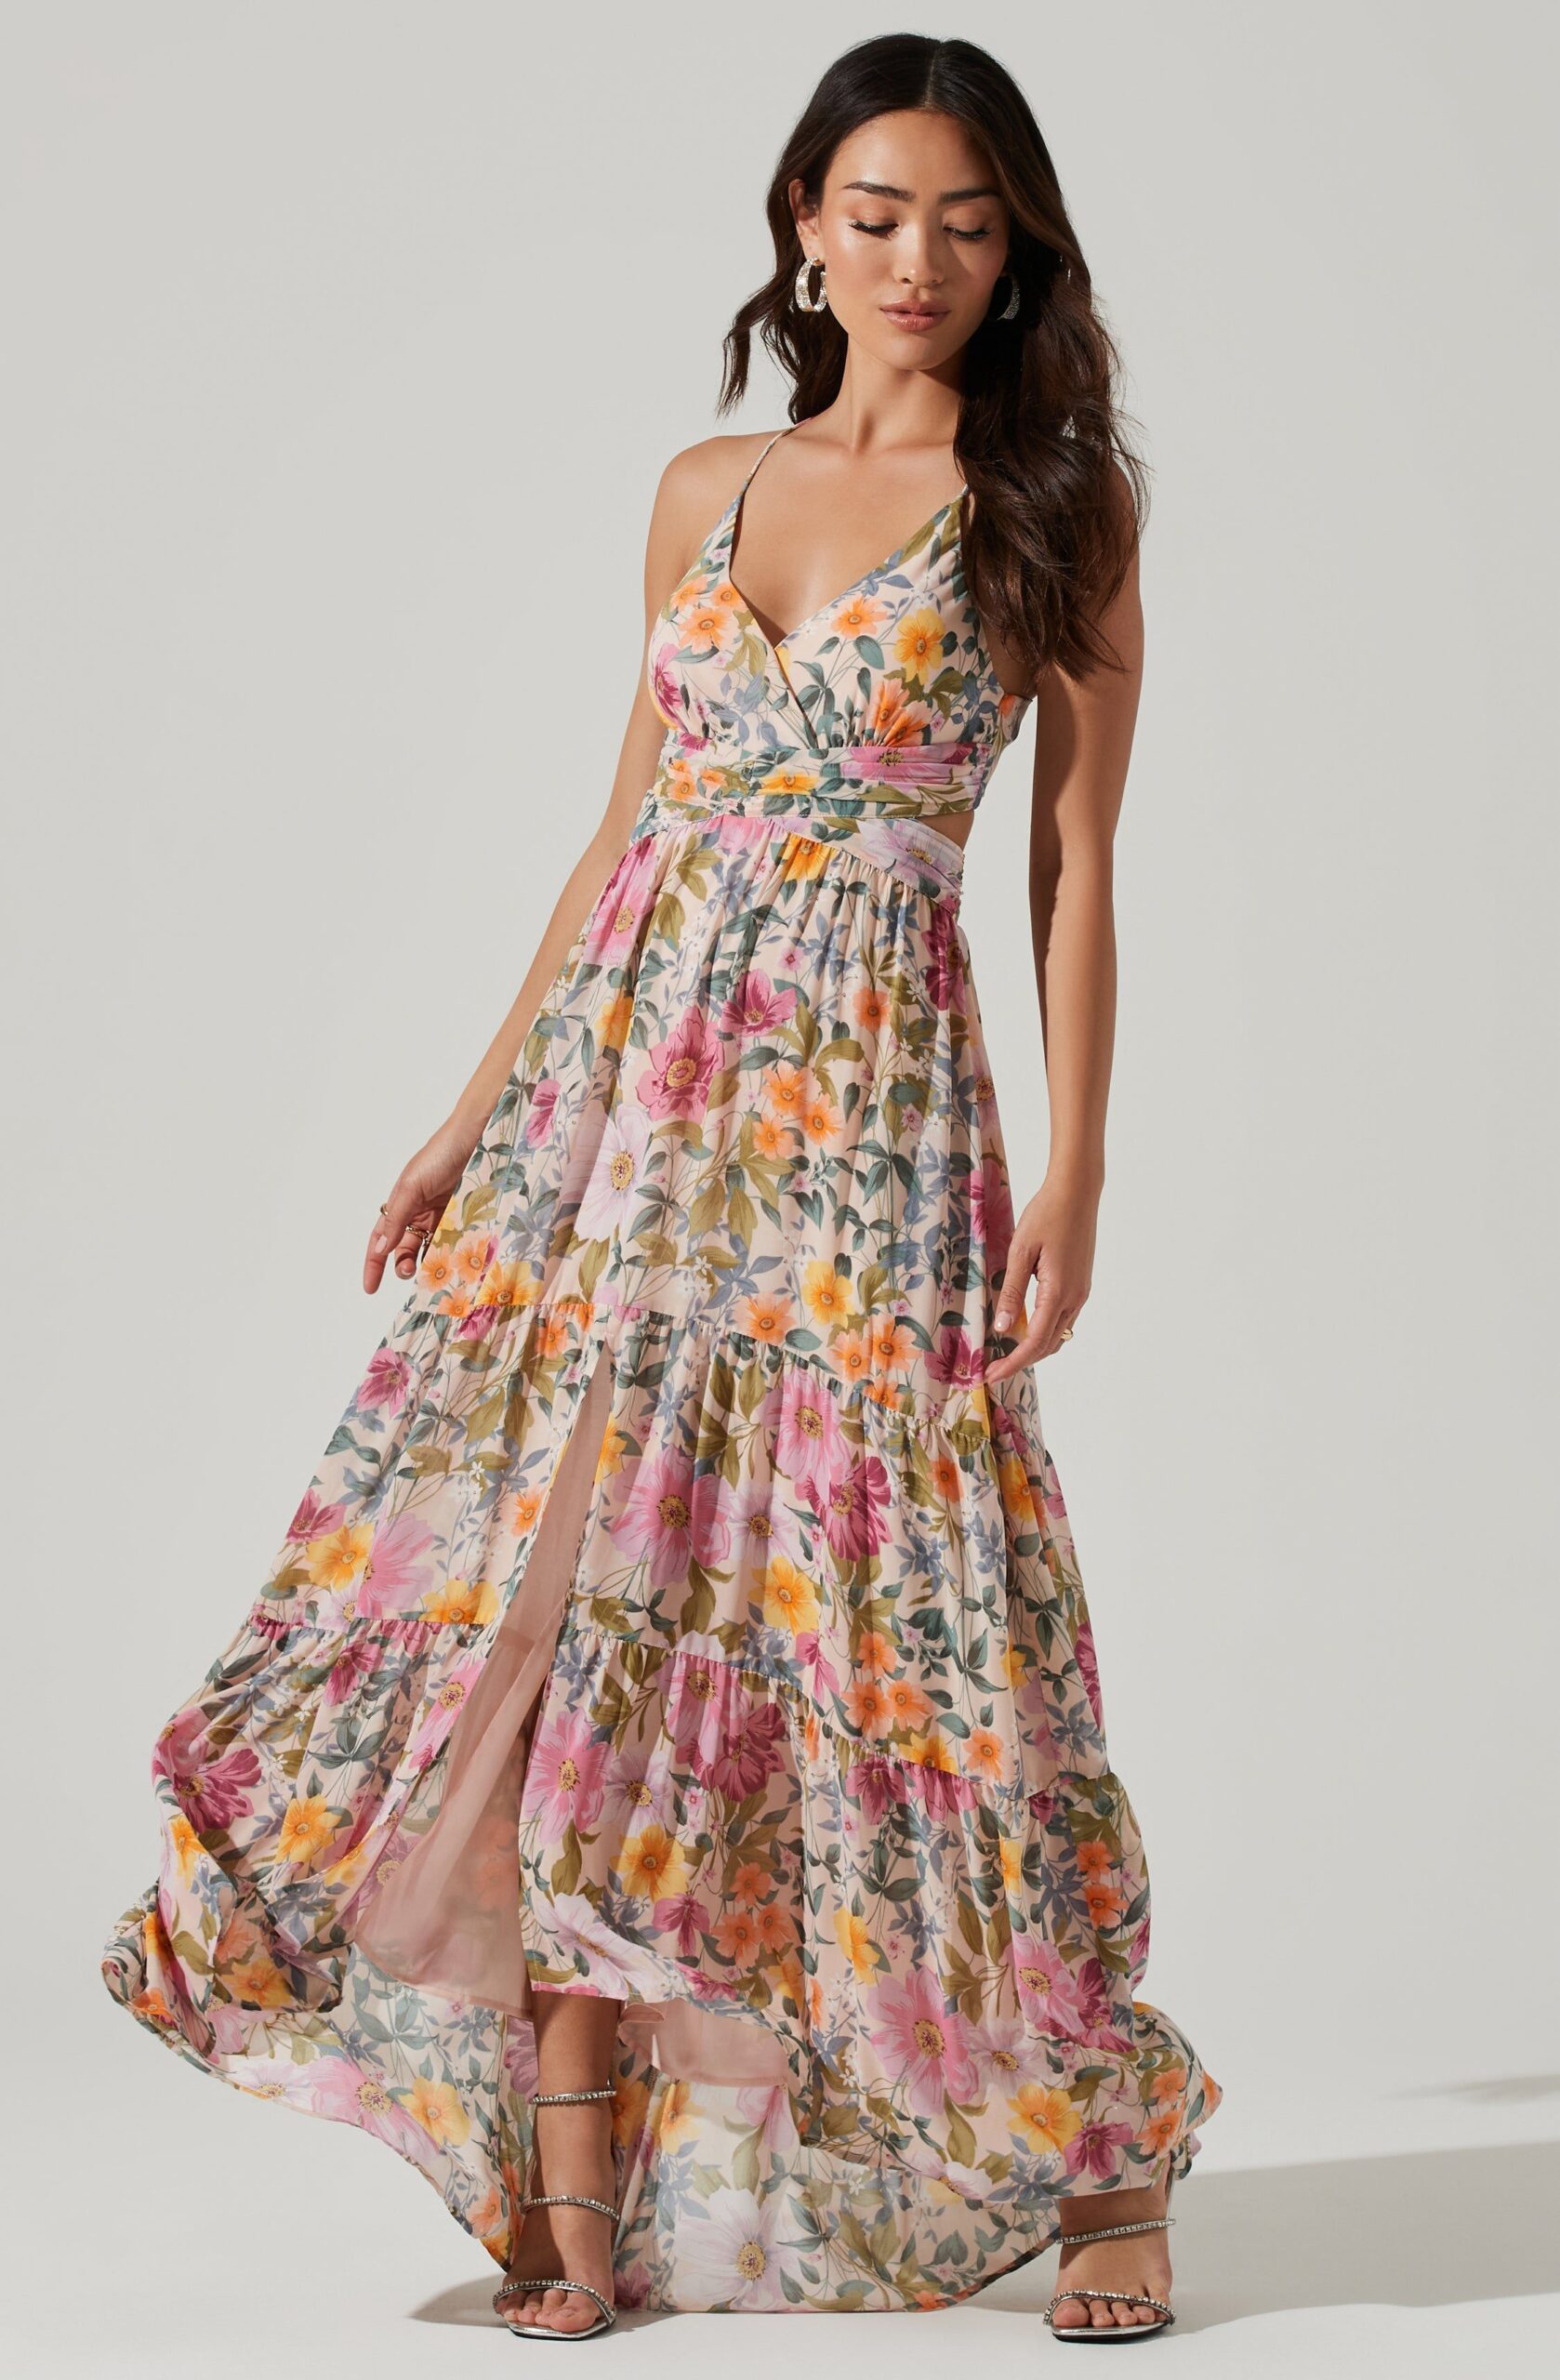 Floral Dresses: Embracing Nature’s Beauty in Fashion